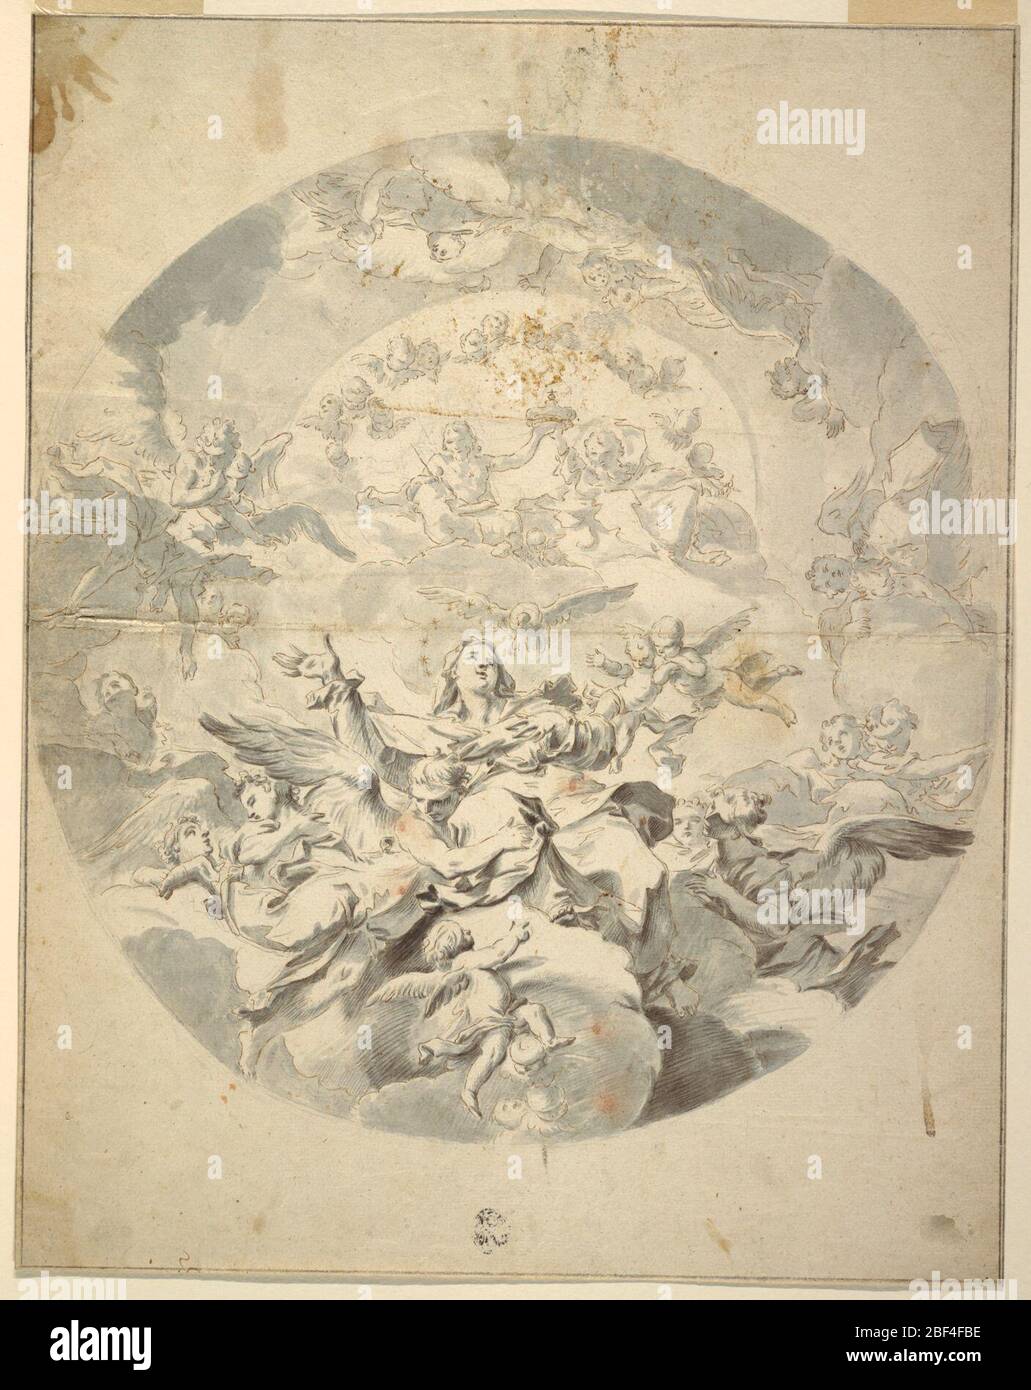 Ascension of the Virgin. Vertical rectangle, design for a circular ceiling painting. At the bottom is a group of angels lifting the Virgin Mary to heaven. Christ and donor (?) or God the Father, raising a crown together, are shown in clouds above. Stock Photo